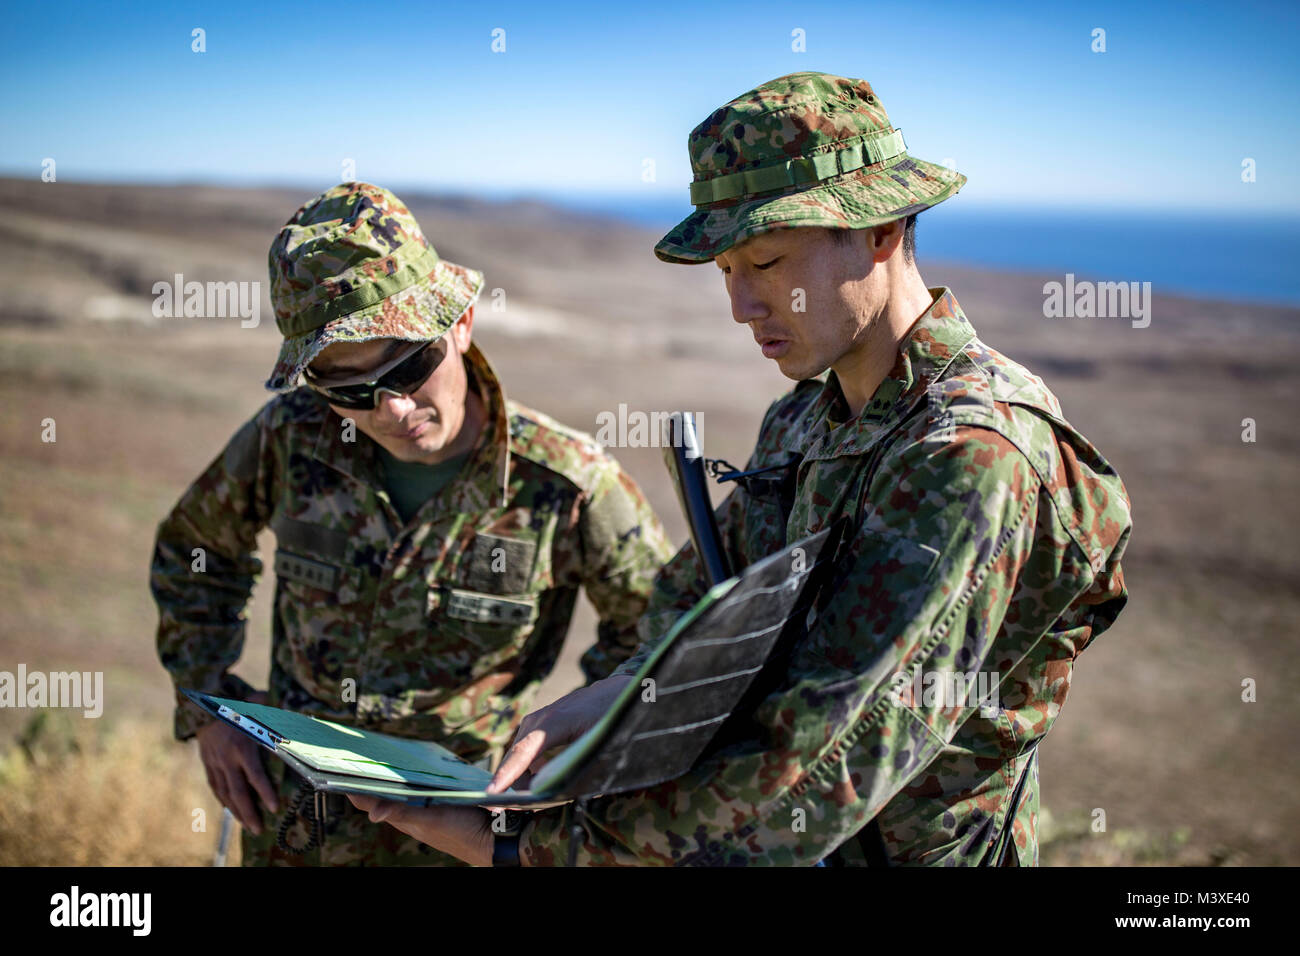 MARINE CORPS BASE CAMP PENDLETON, Calif. – Japan Ground Self Defense Force Soldiers converse about conducting close air support training on San Clemente Island during exercise Iron Fist 2018, Jan. 31. Exercise Iron Fist brings together U.S. Marines from the 11th Marine Expeditionary Unit and soldiers from the JGSDF, Western Army Infantry Regiment, to improve their bilateral planning, communicating, and conducting of combined amphibious operations. (U.S. Marine Corps photo by Cpl. Jacob A. Farbo) Stock Photo